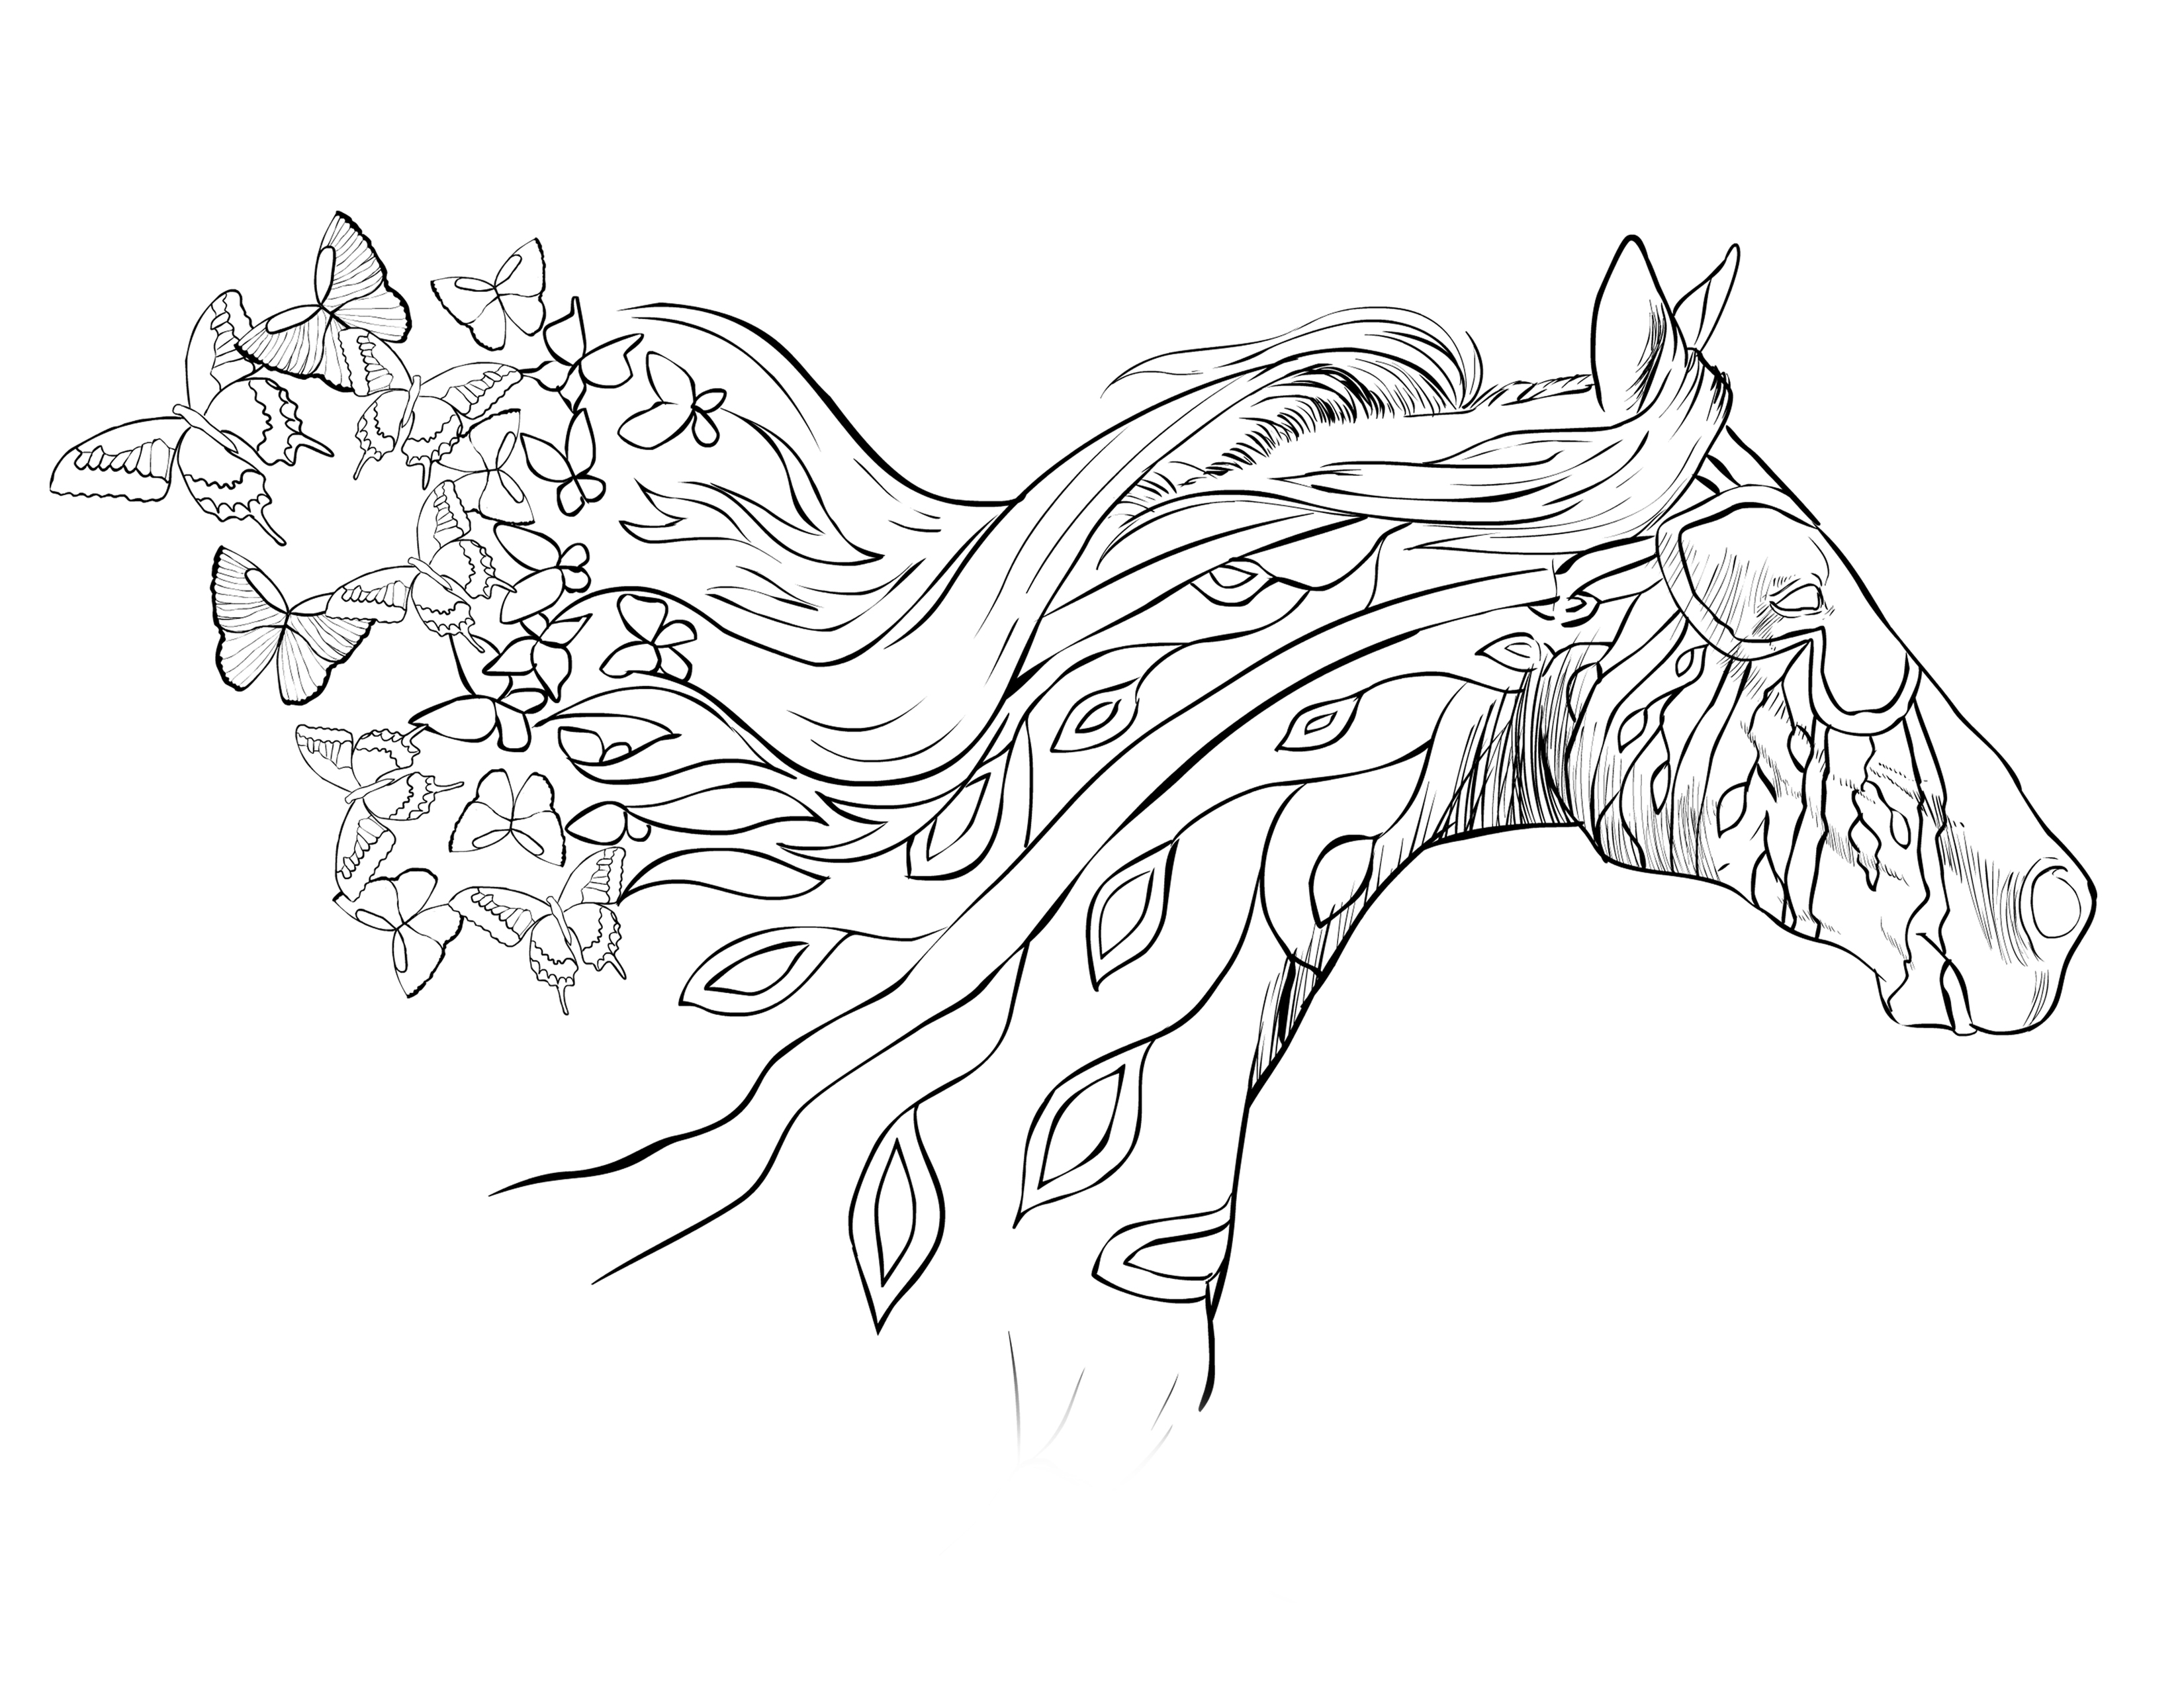 Coloring Pages : Coloring Pages Amazing Free Horse Pictures ...